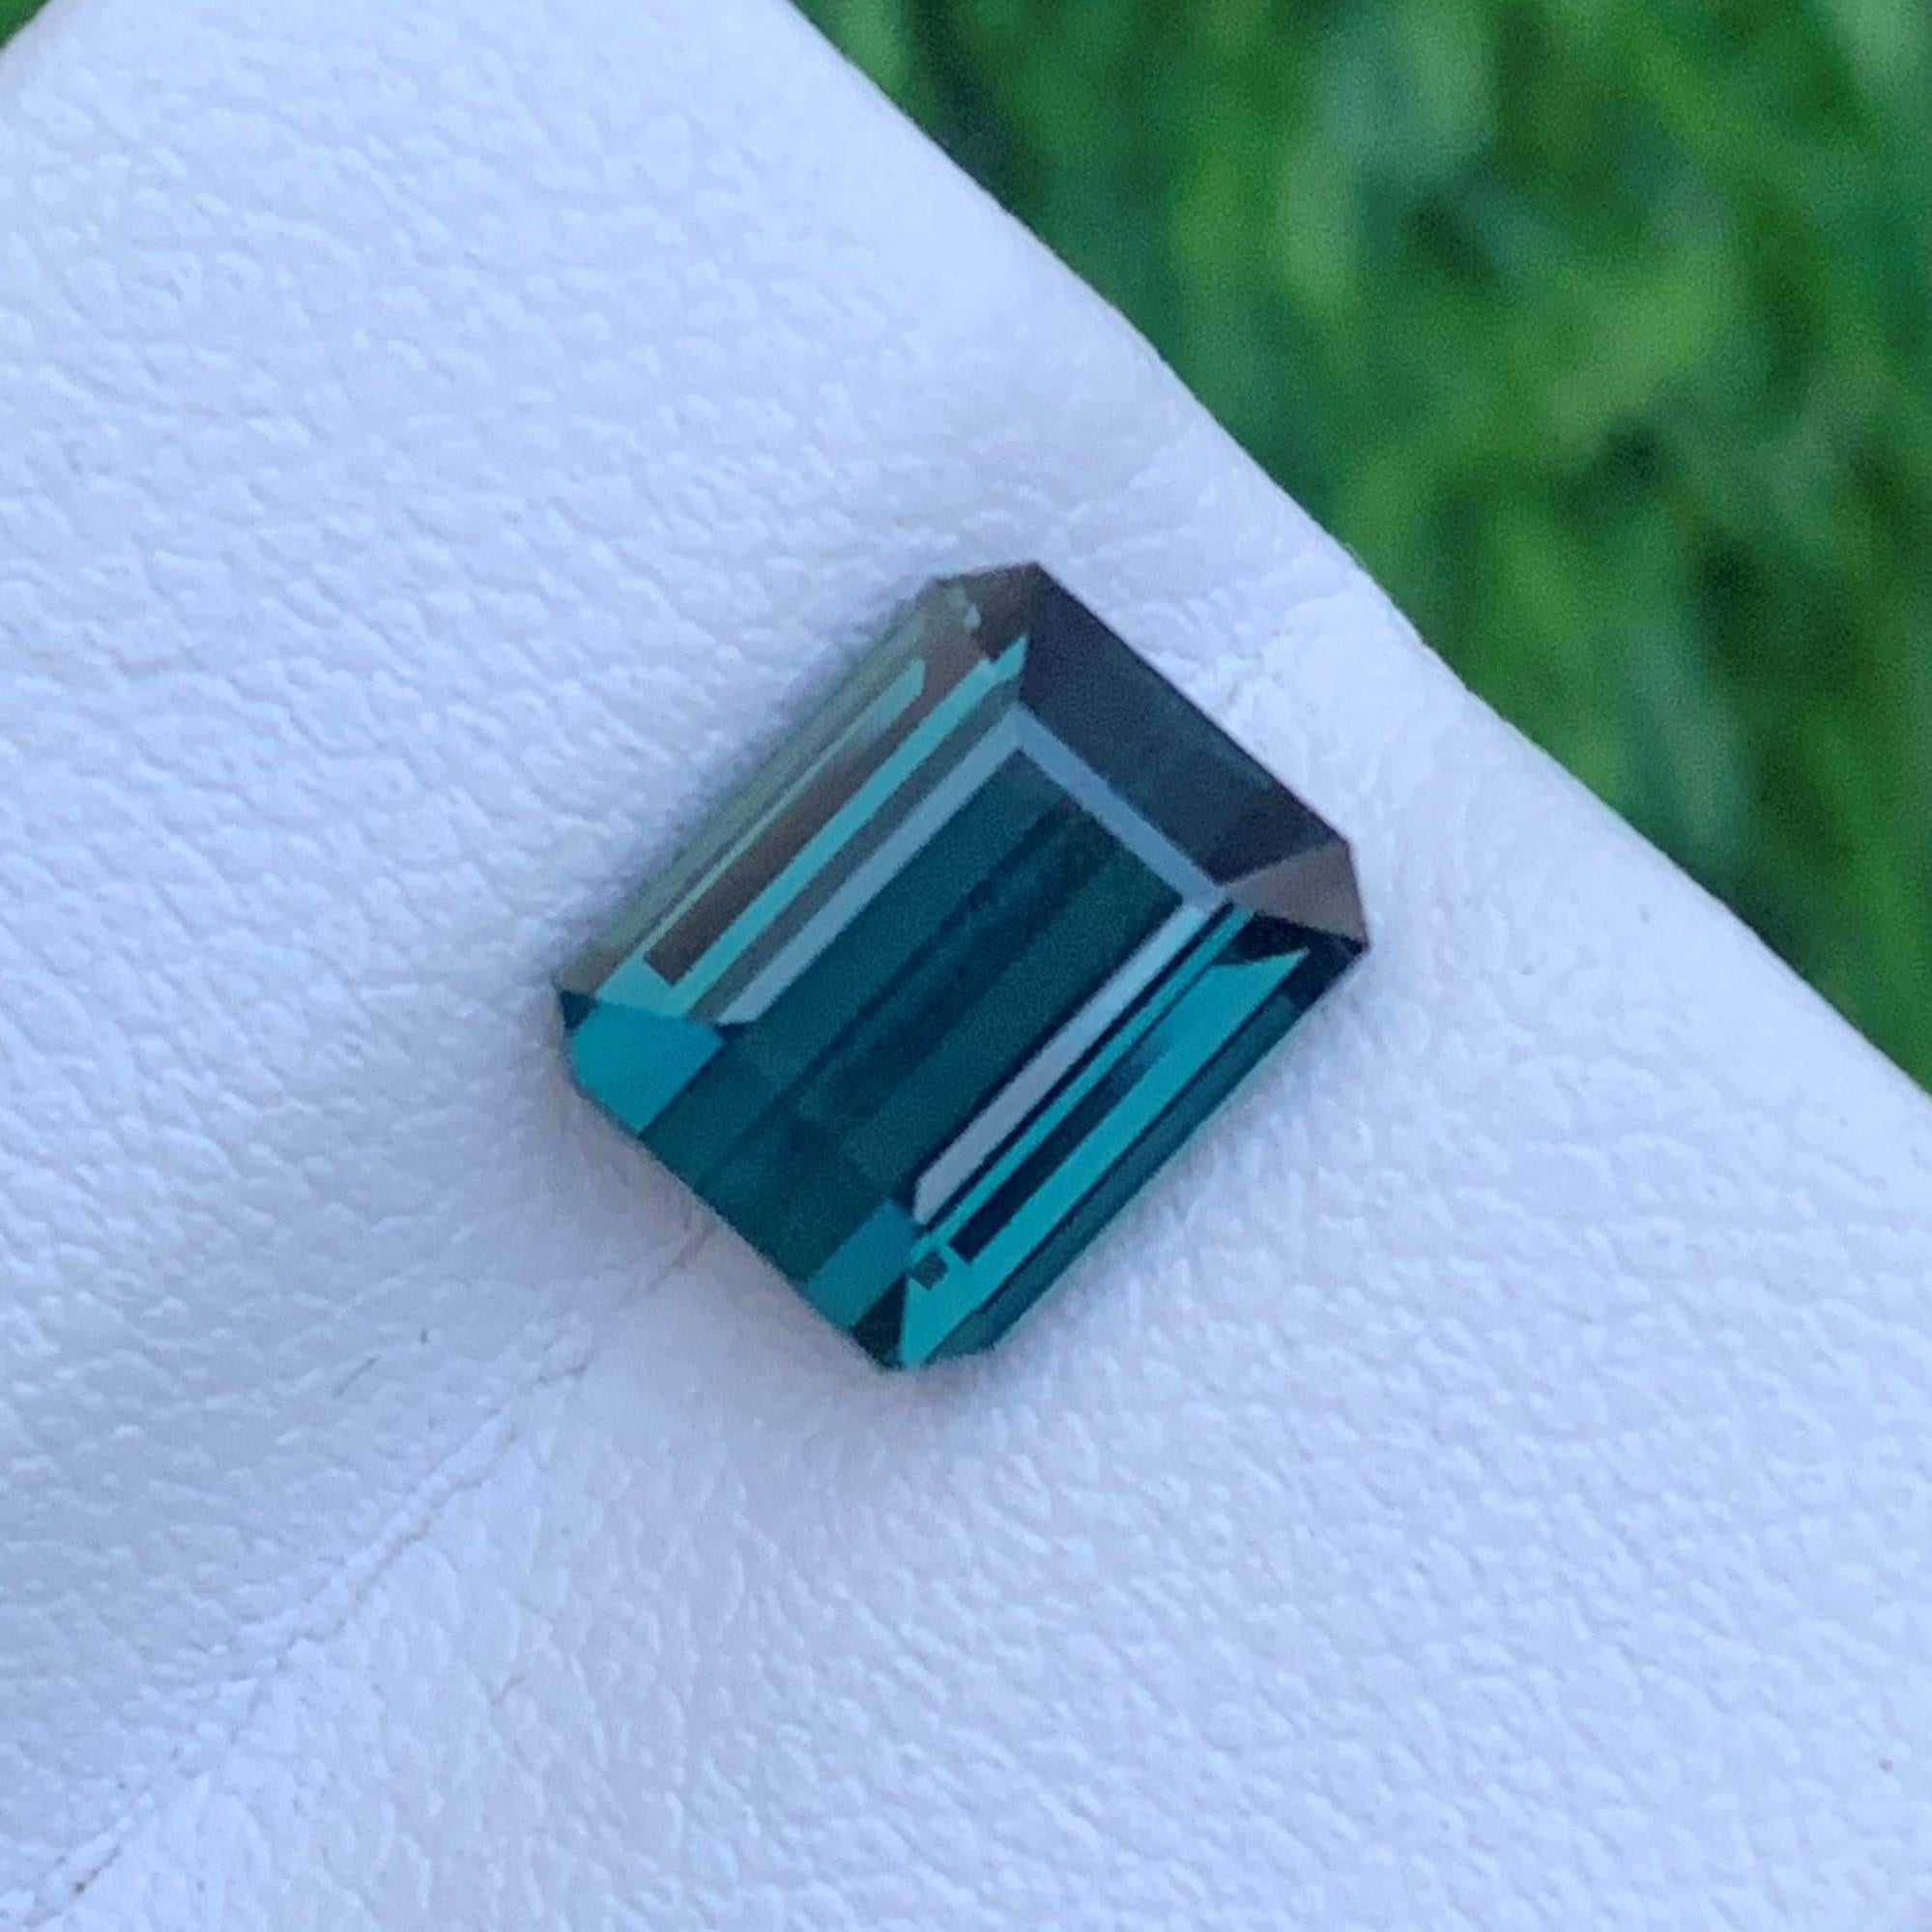 Gorgeous Loose Indicolite Tourmaline
Weight: 2.90 Carats
Dimension: 8.7x7.1x4.9 Mm
Origin; Kunar Afghanistan Mine
Color: Blue
Shape: Emerald
Treatment: Non
Certificate: On Demand
Indicolite tourmalines (tourmalines with blue in them) are rare.